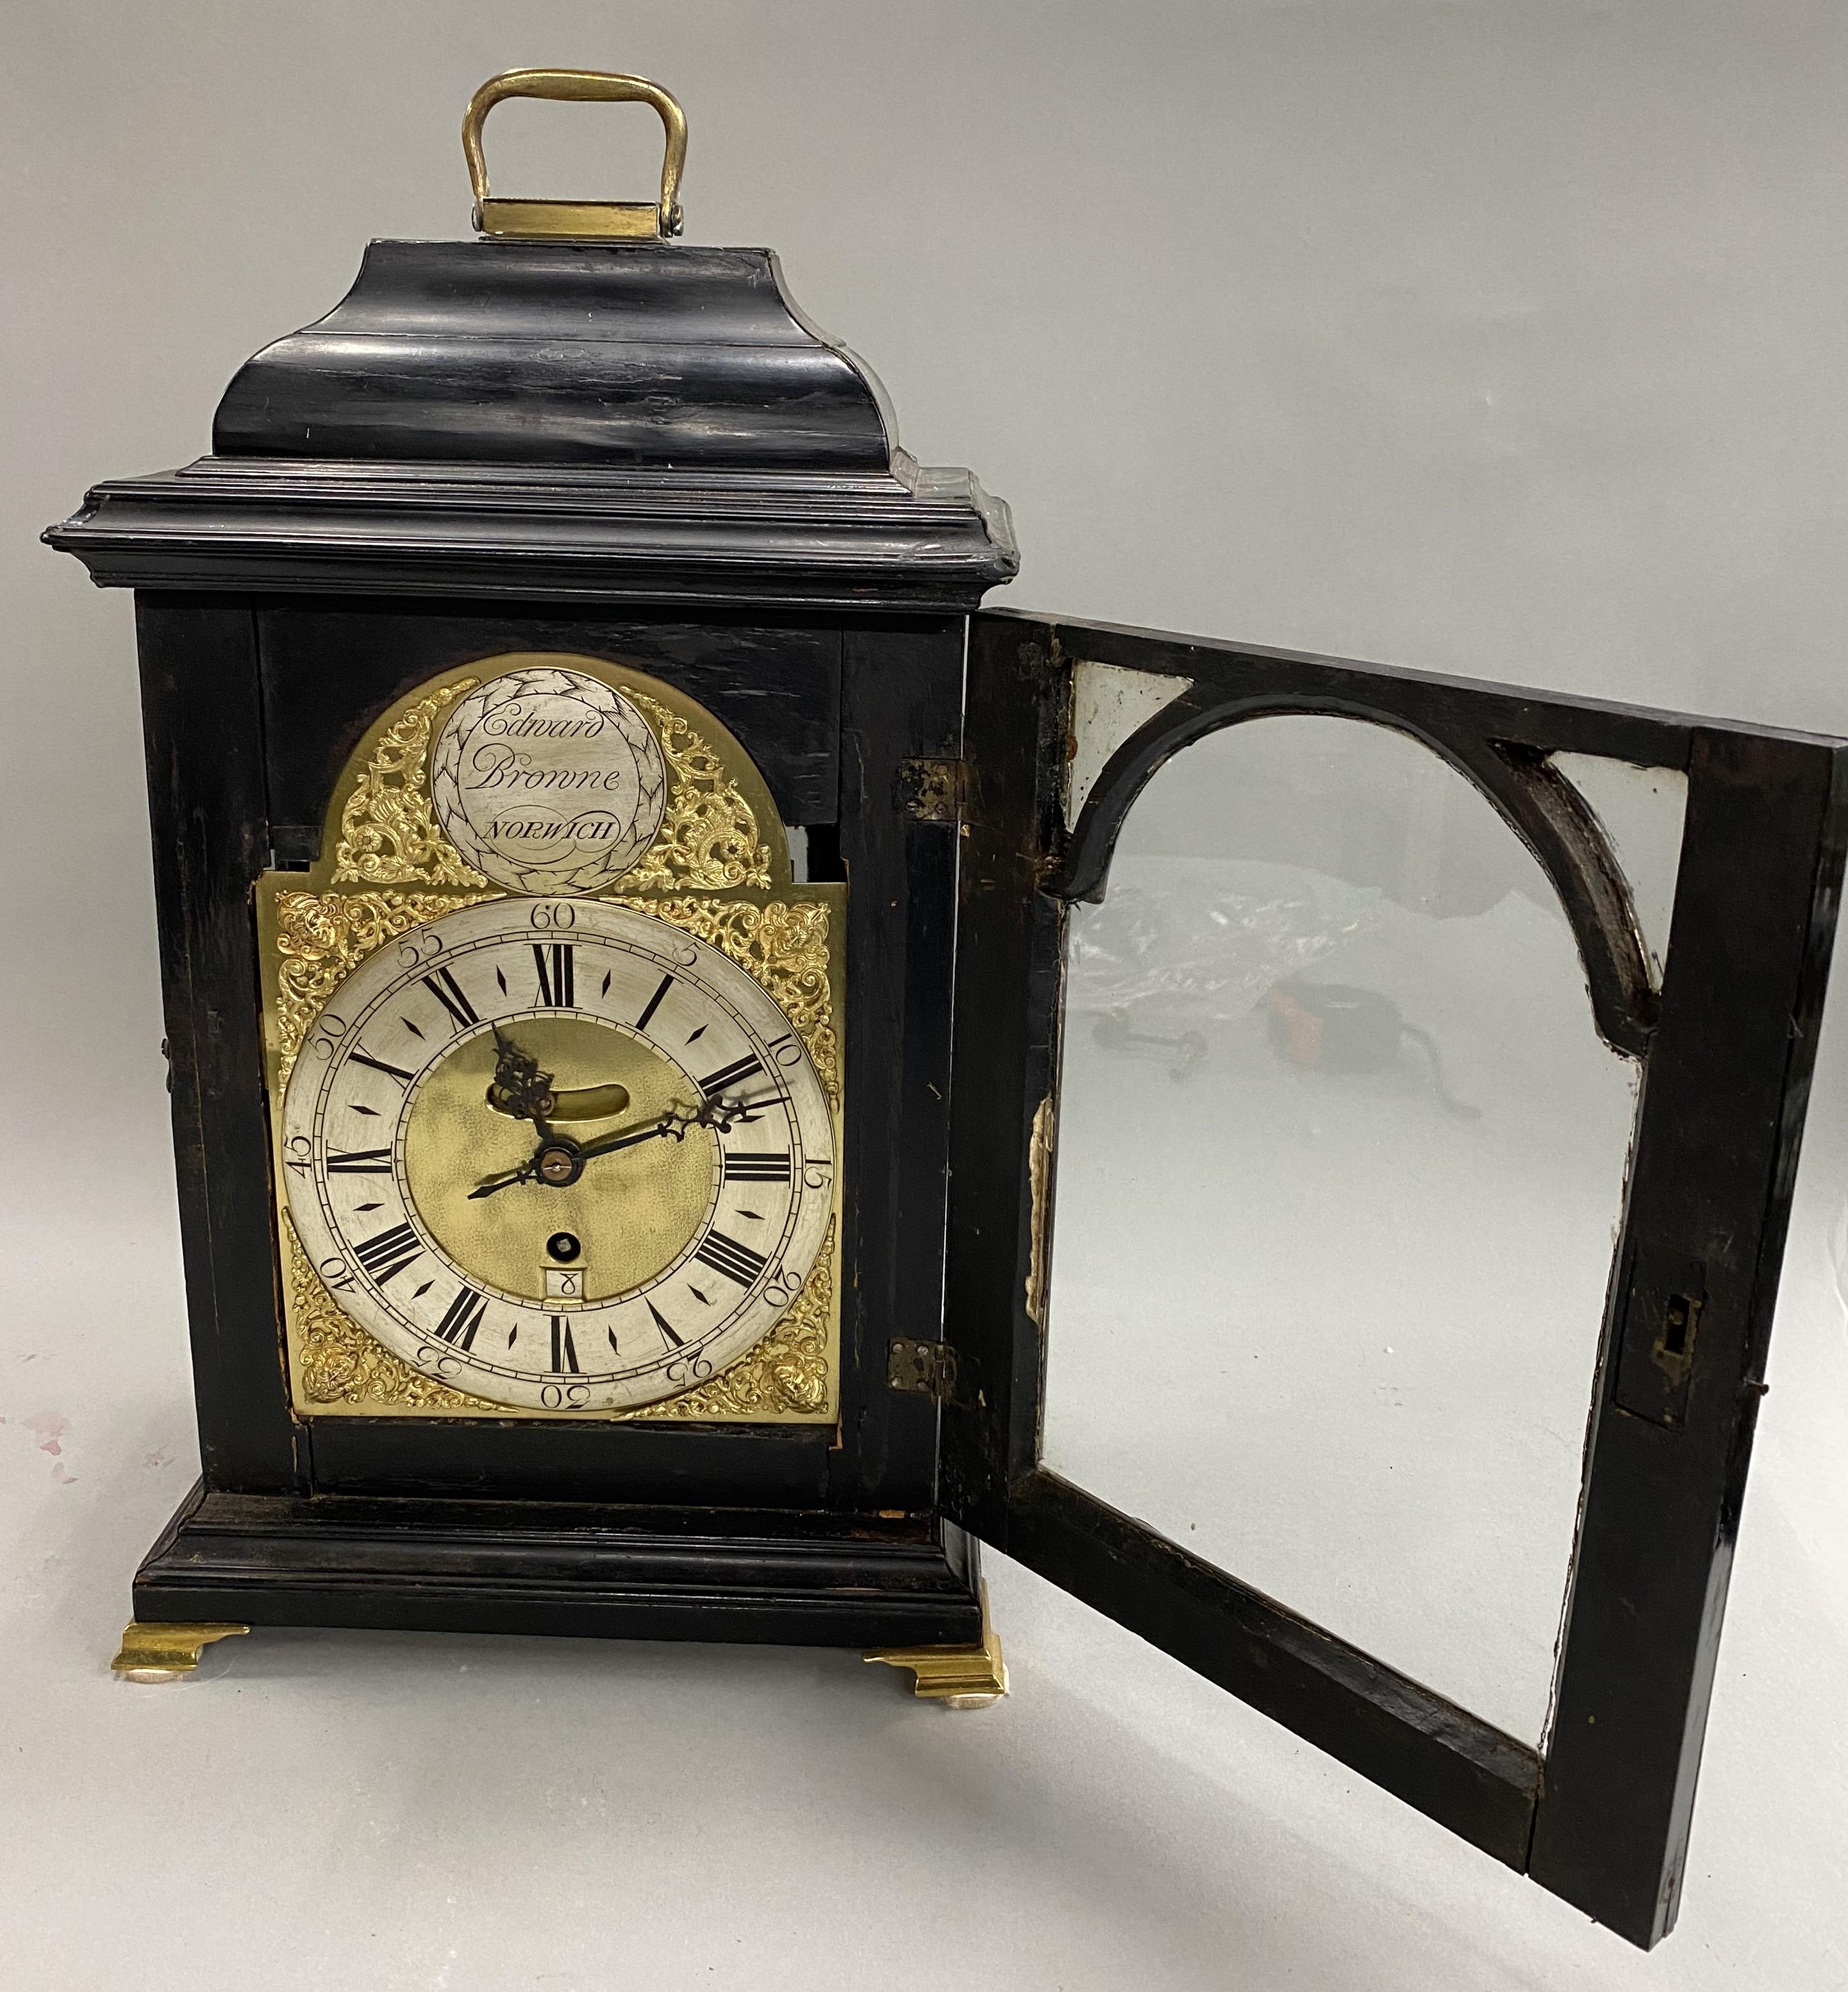 A nice example of a George II bracket clock in an ebonized mahogany case with brass feet made by clockmaker Edward Browne of Norwich. Edward Browne took over the shop of clockmaker Jeremah Hartley in the Market Place, Norwich after Hartley's death